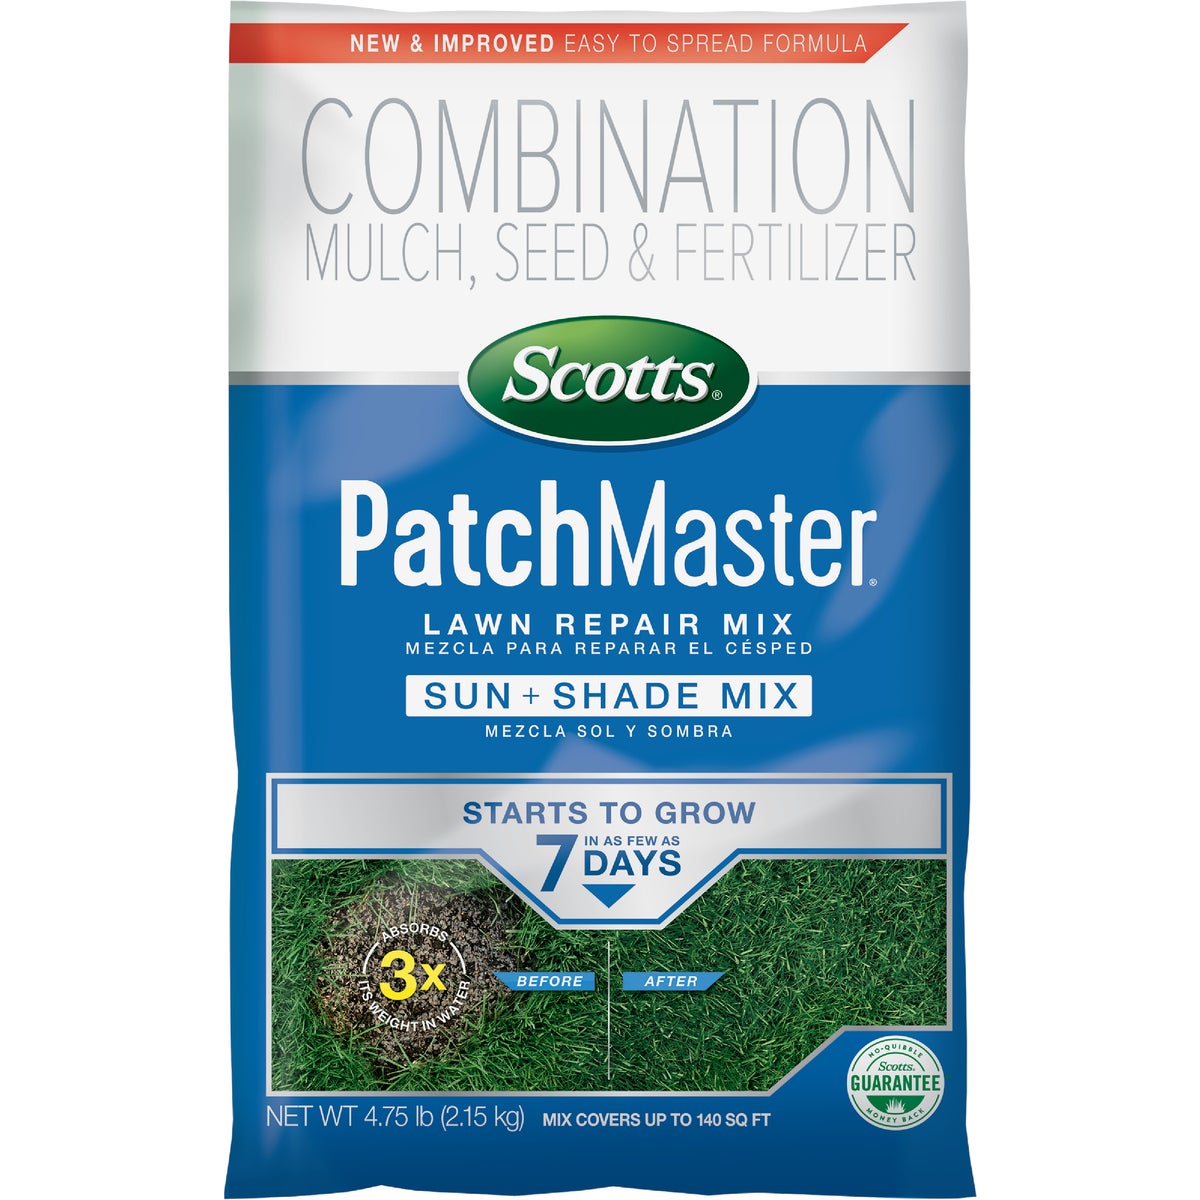 Item 712651, Scotts PatchMaster Lawn Repair Mix Sun + Shade Mix comes pre-mixed to make 